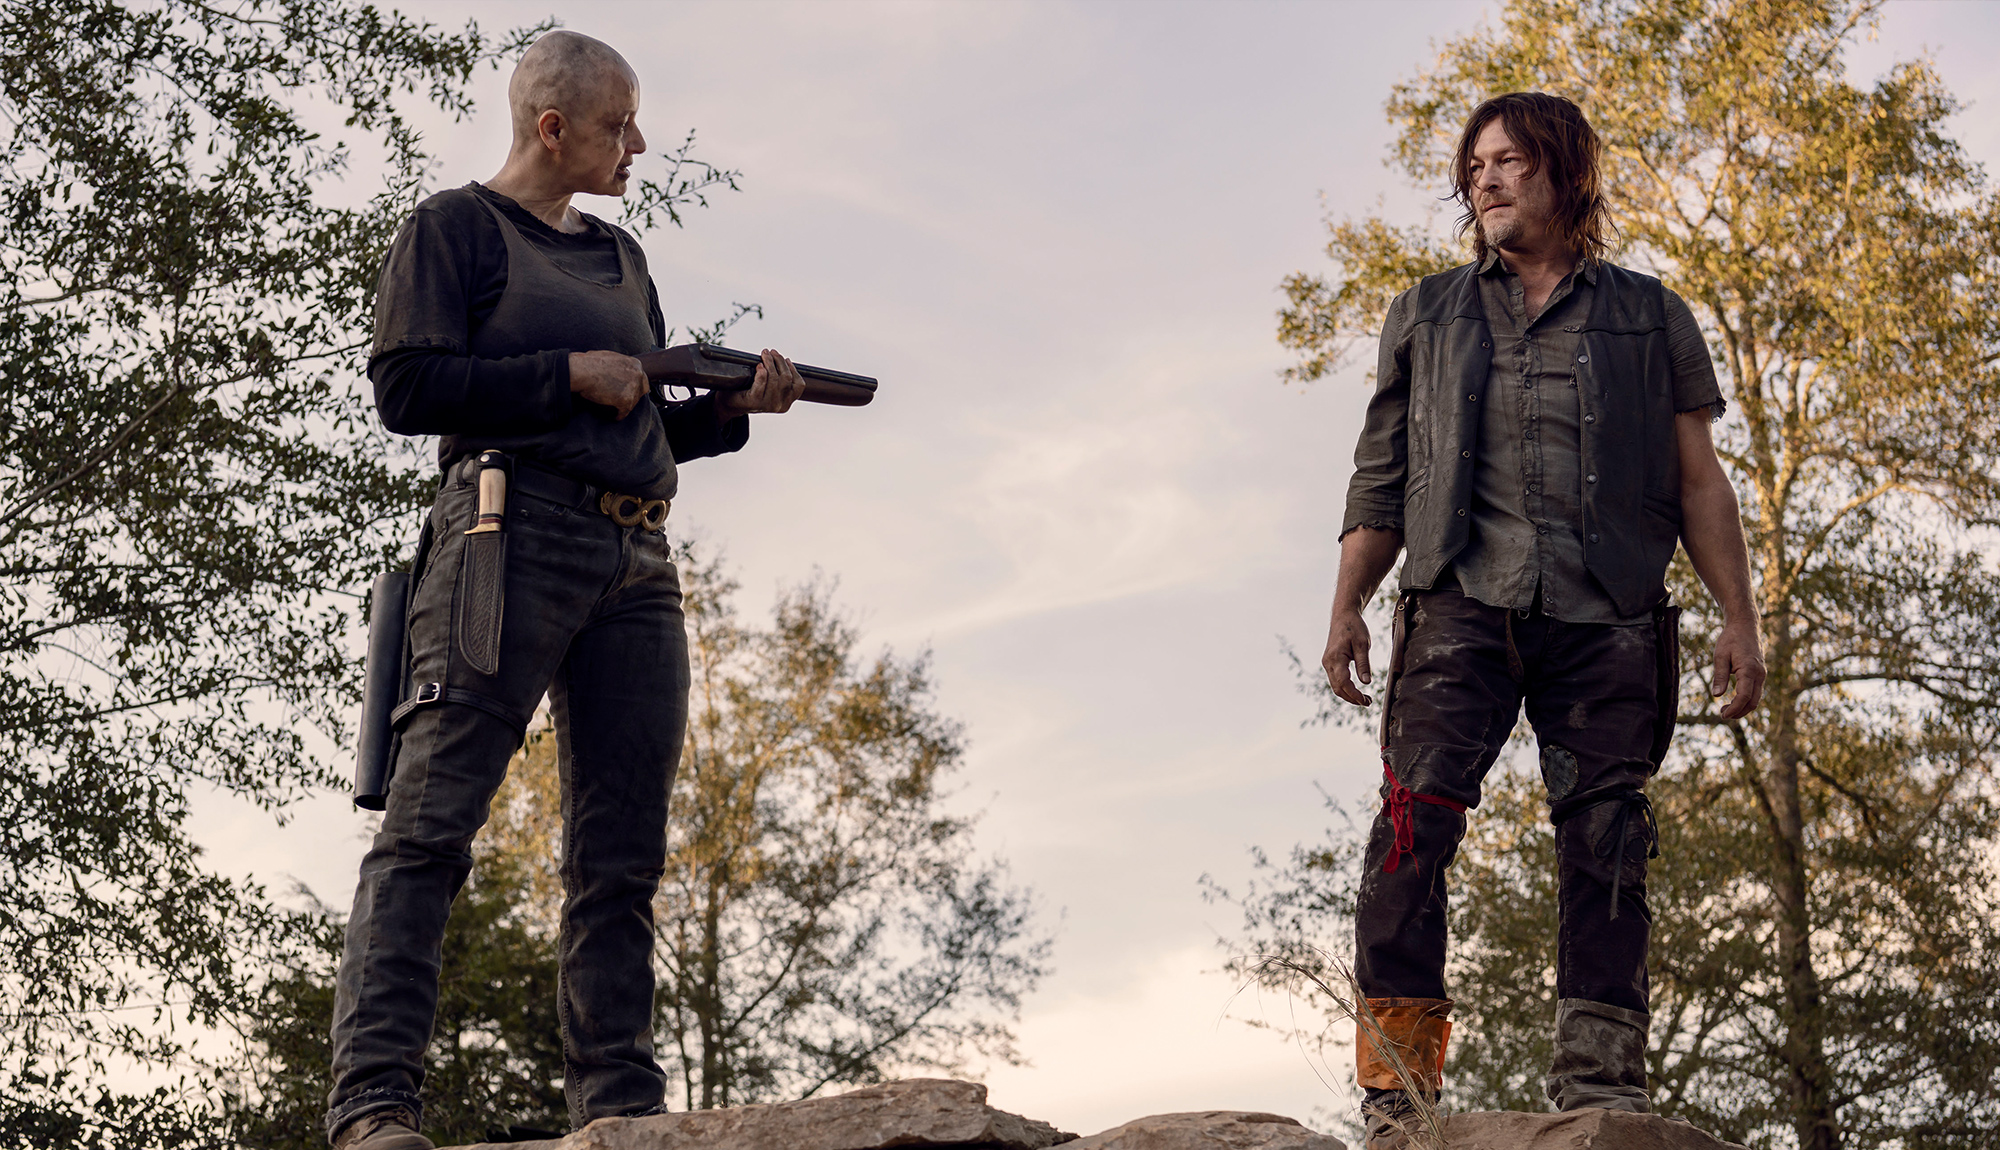 The Best Images From The Walking Dead Season 9 Episode 15